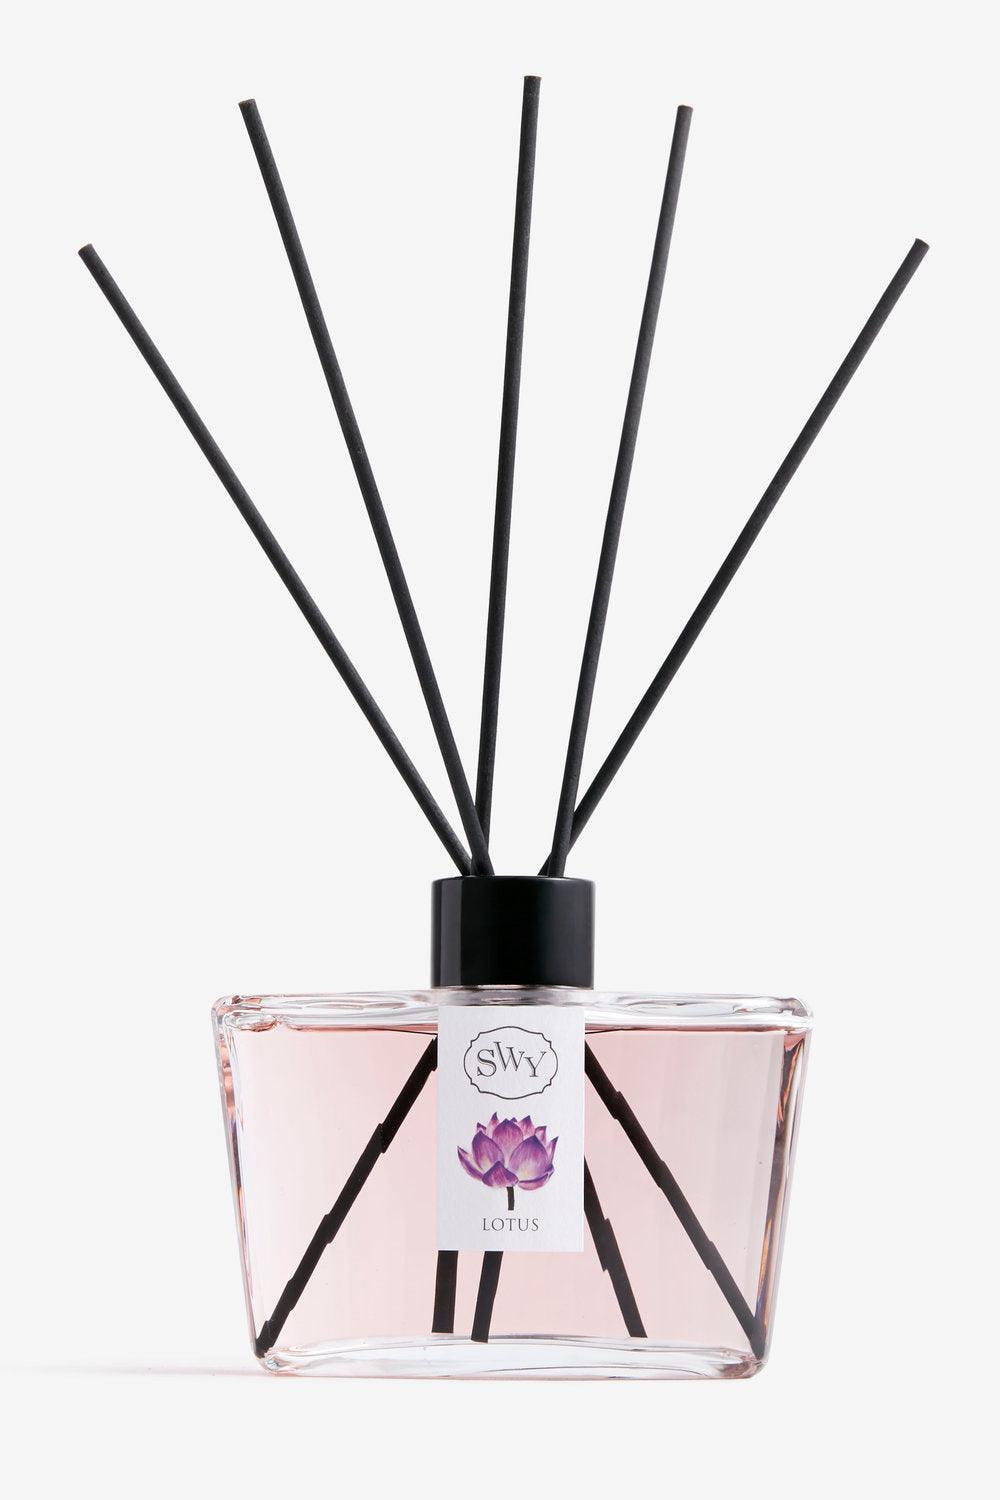 Reeds Diffuser – Lotus - SWY - Scent With You